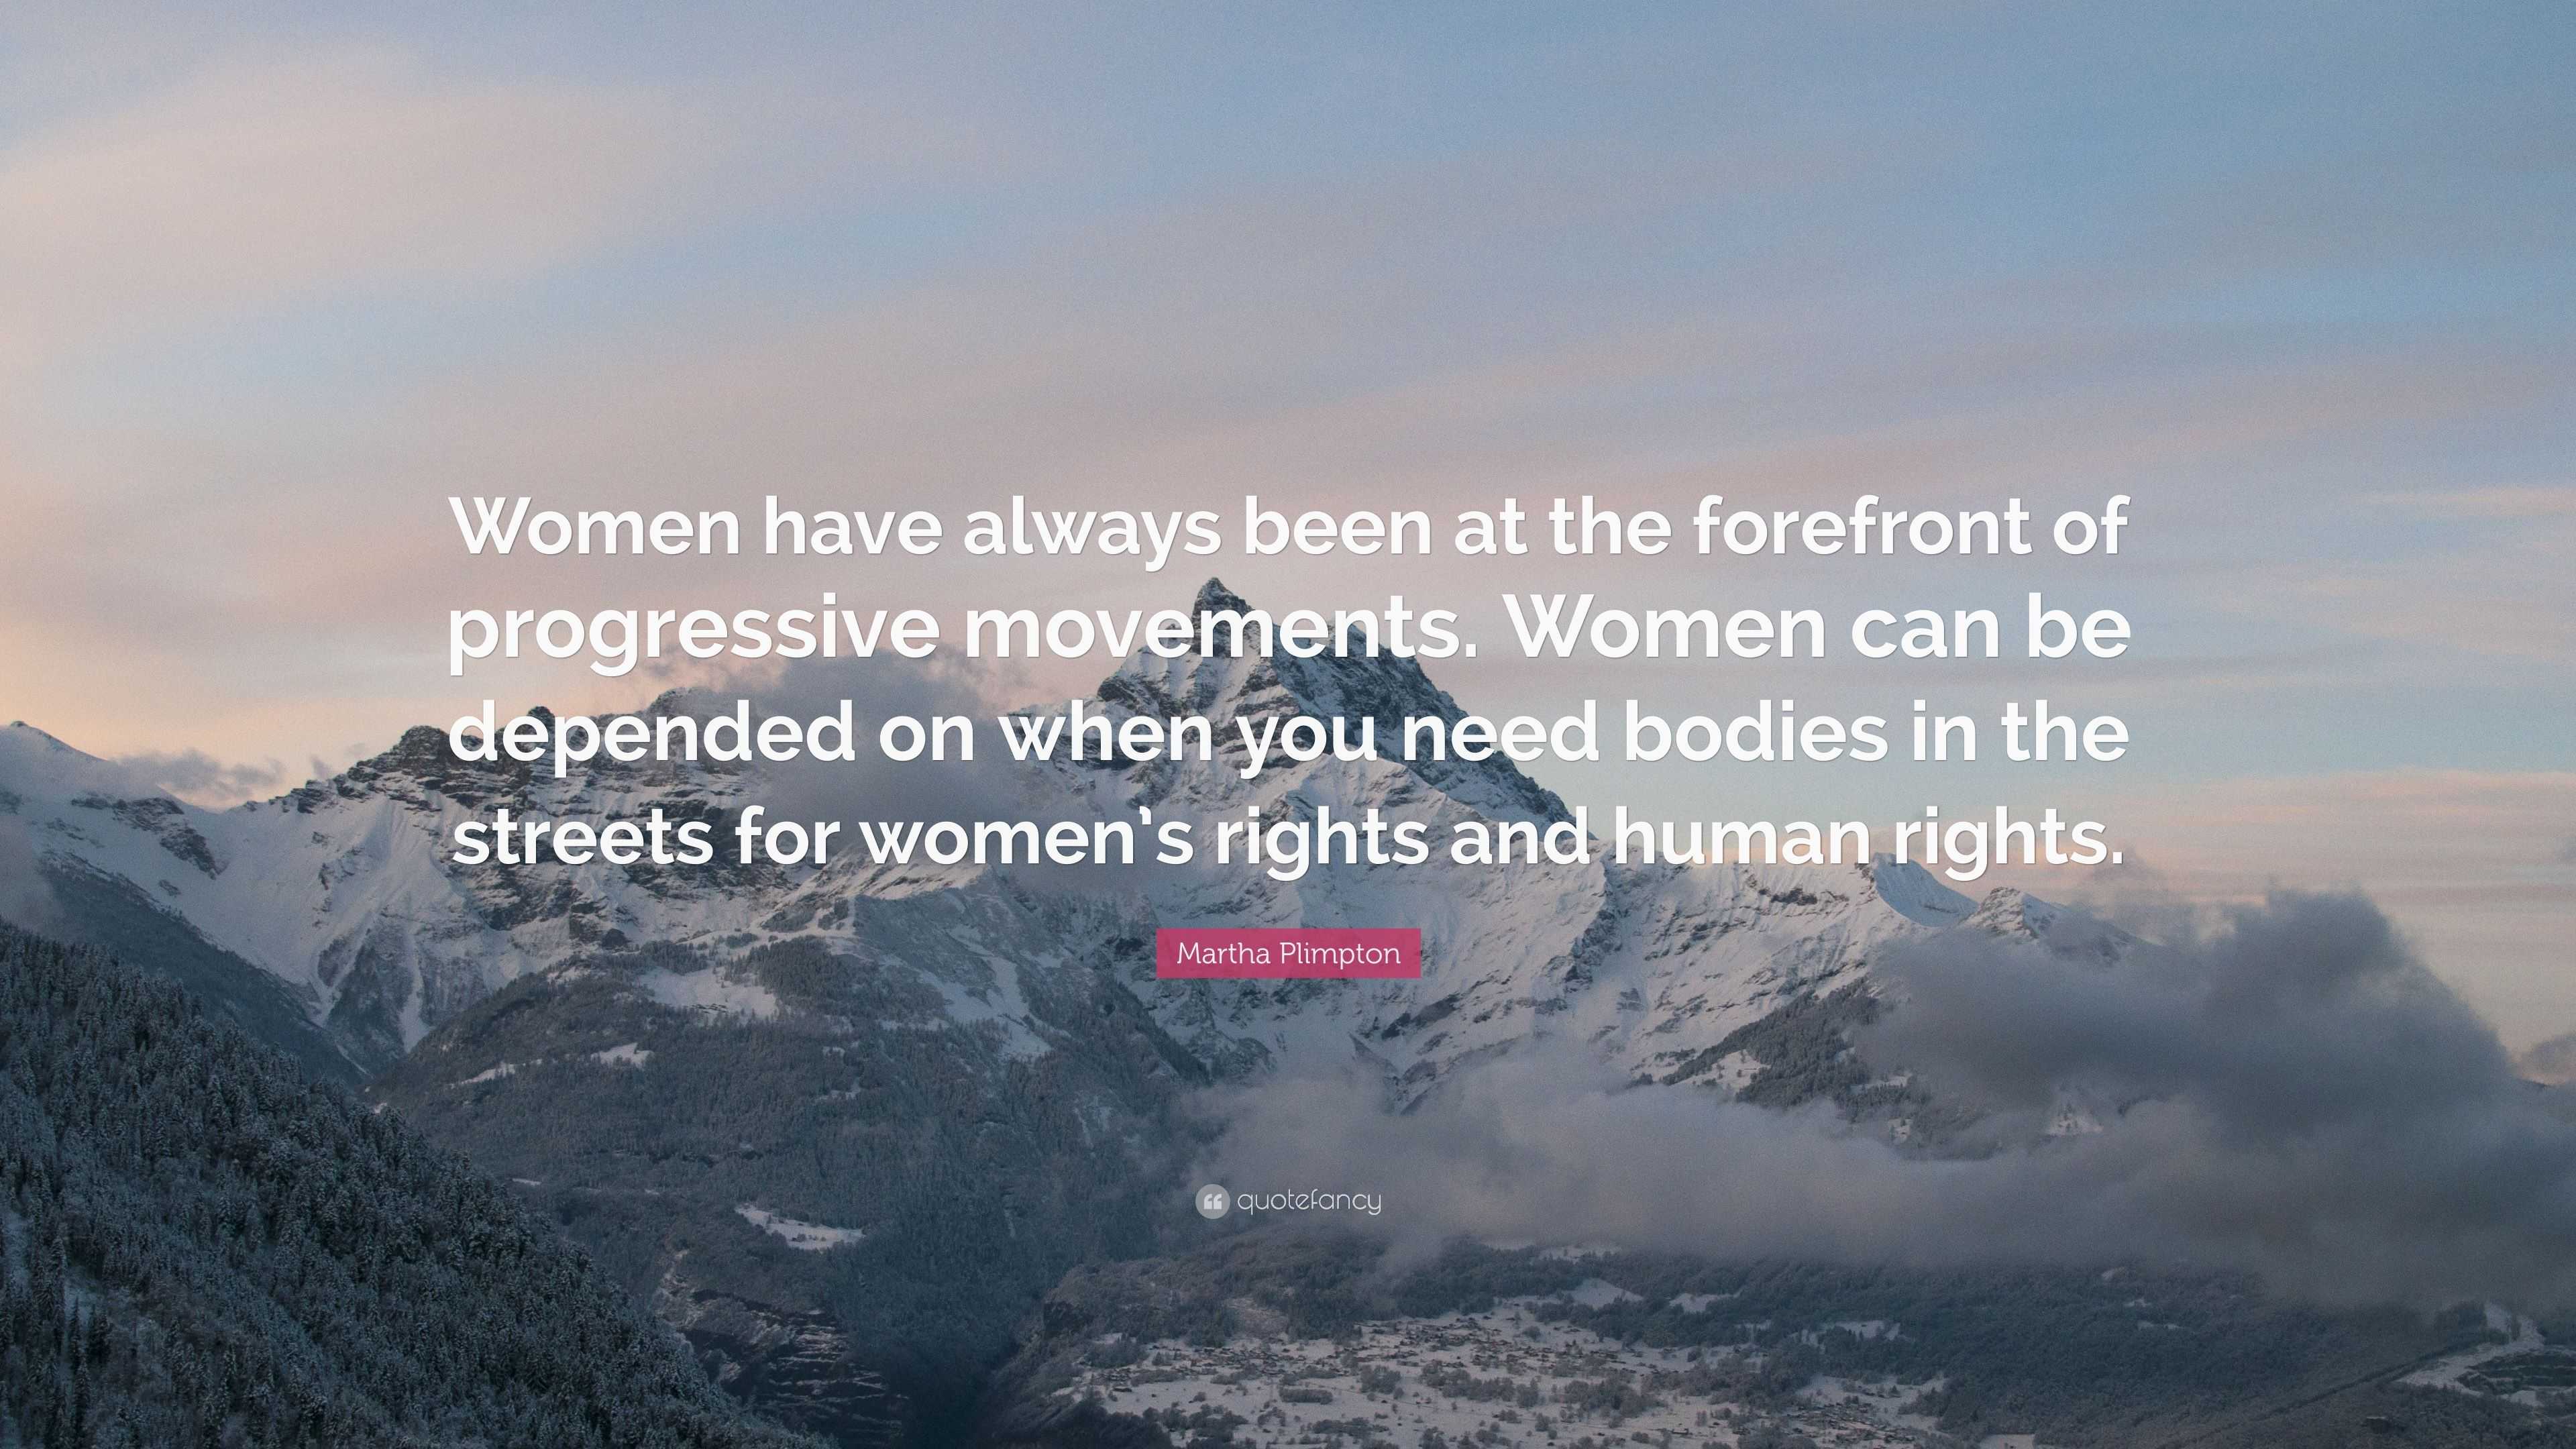 Martha Plimpton Quote: “Women have always been at the forefront of ...